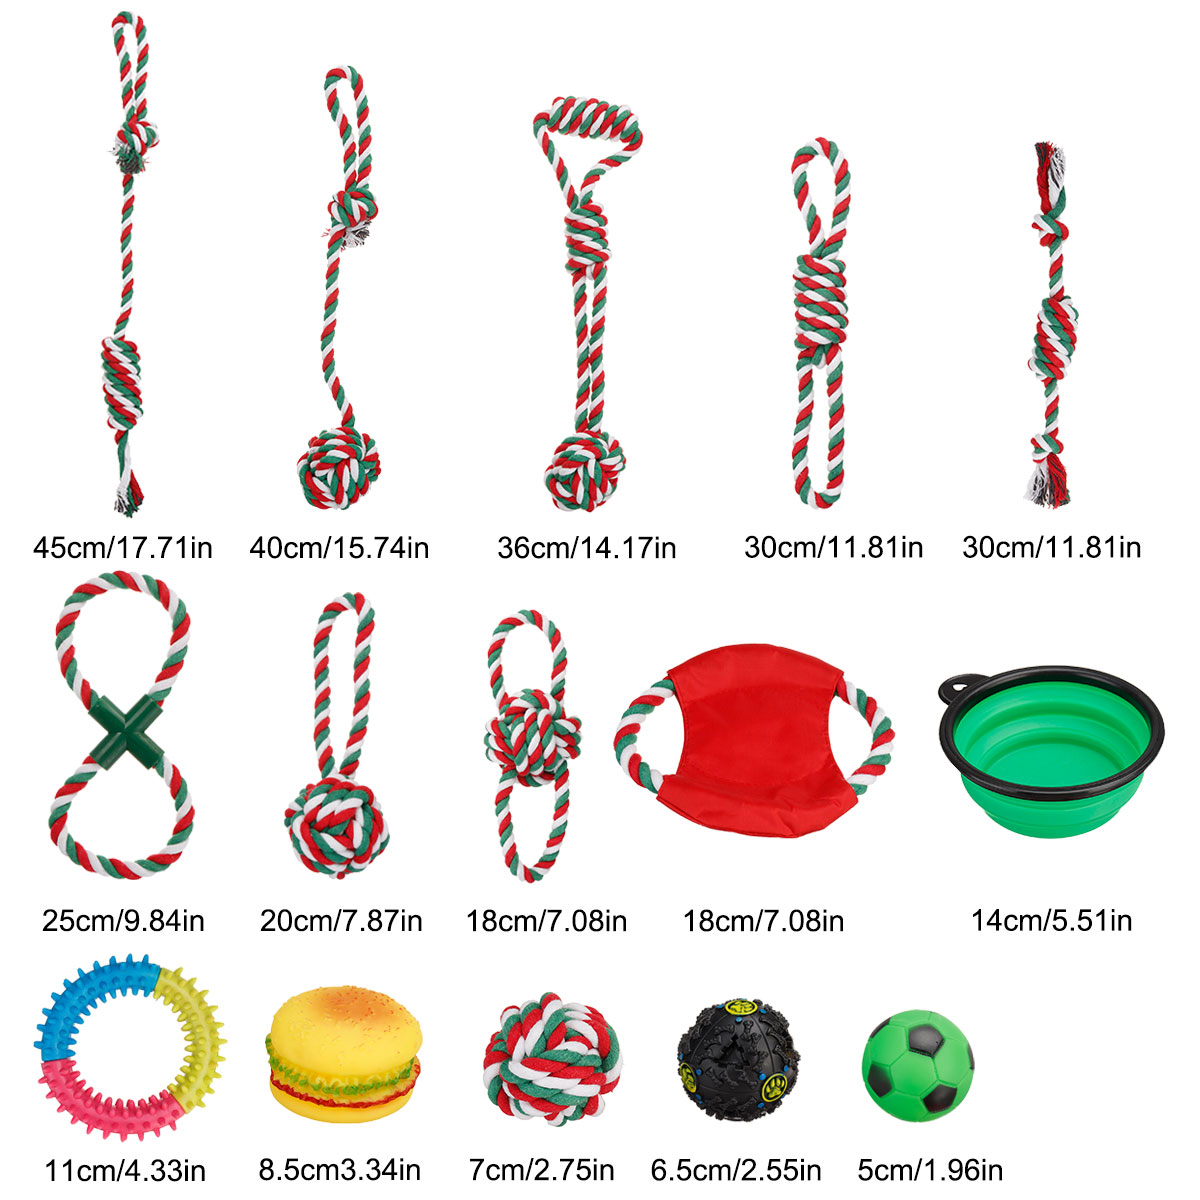 Assorted-Dog-Puppy-Pet-Toys-Ropes-Chew-Balls-Training-Play-Bundle-Teething-Aid-1953171-6